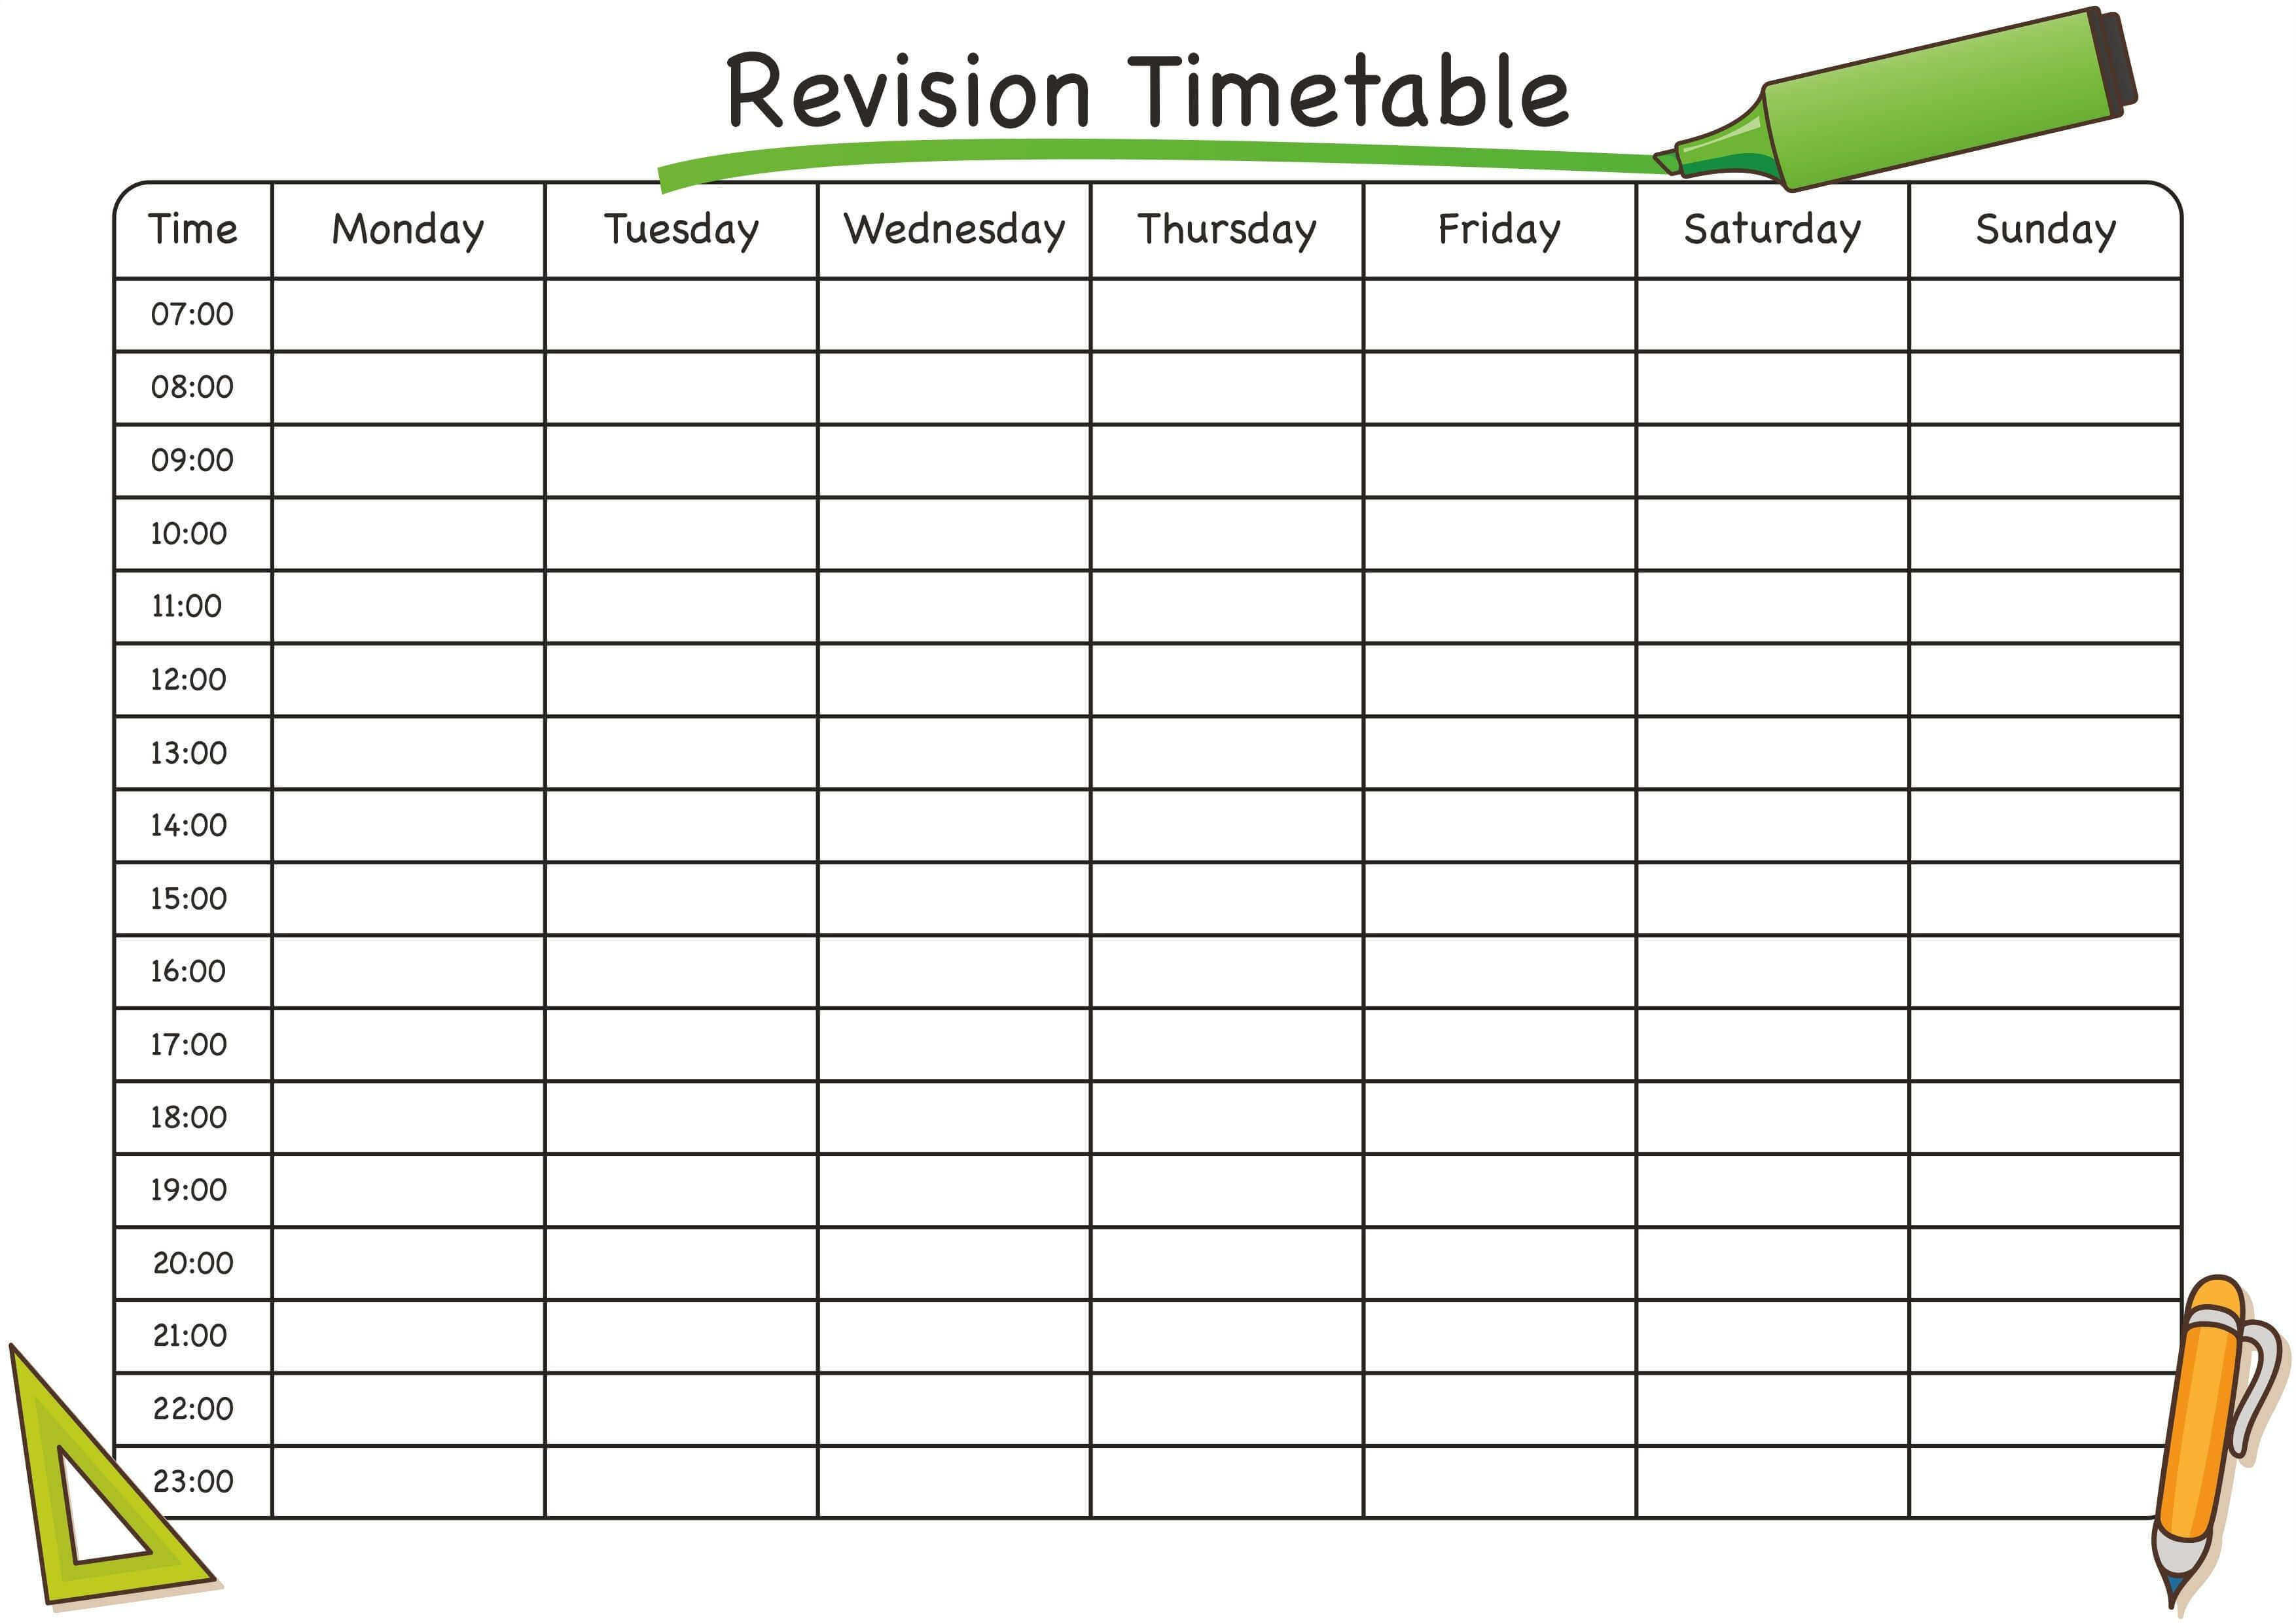 Timetable Template Free #timetabletemplateexcel | Journals With Regard To Blank Revision Timetable Template